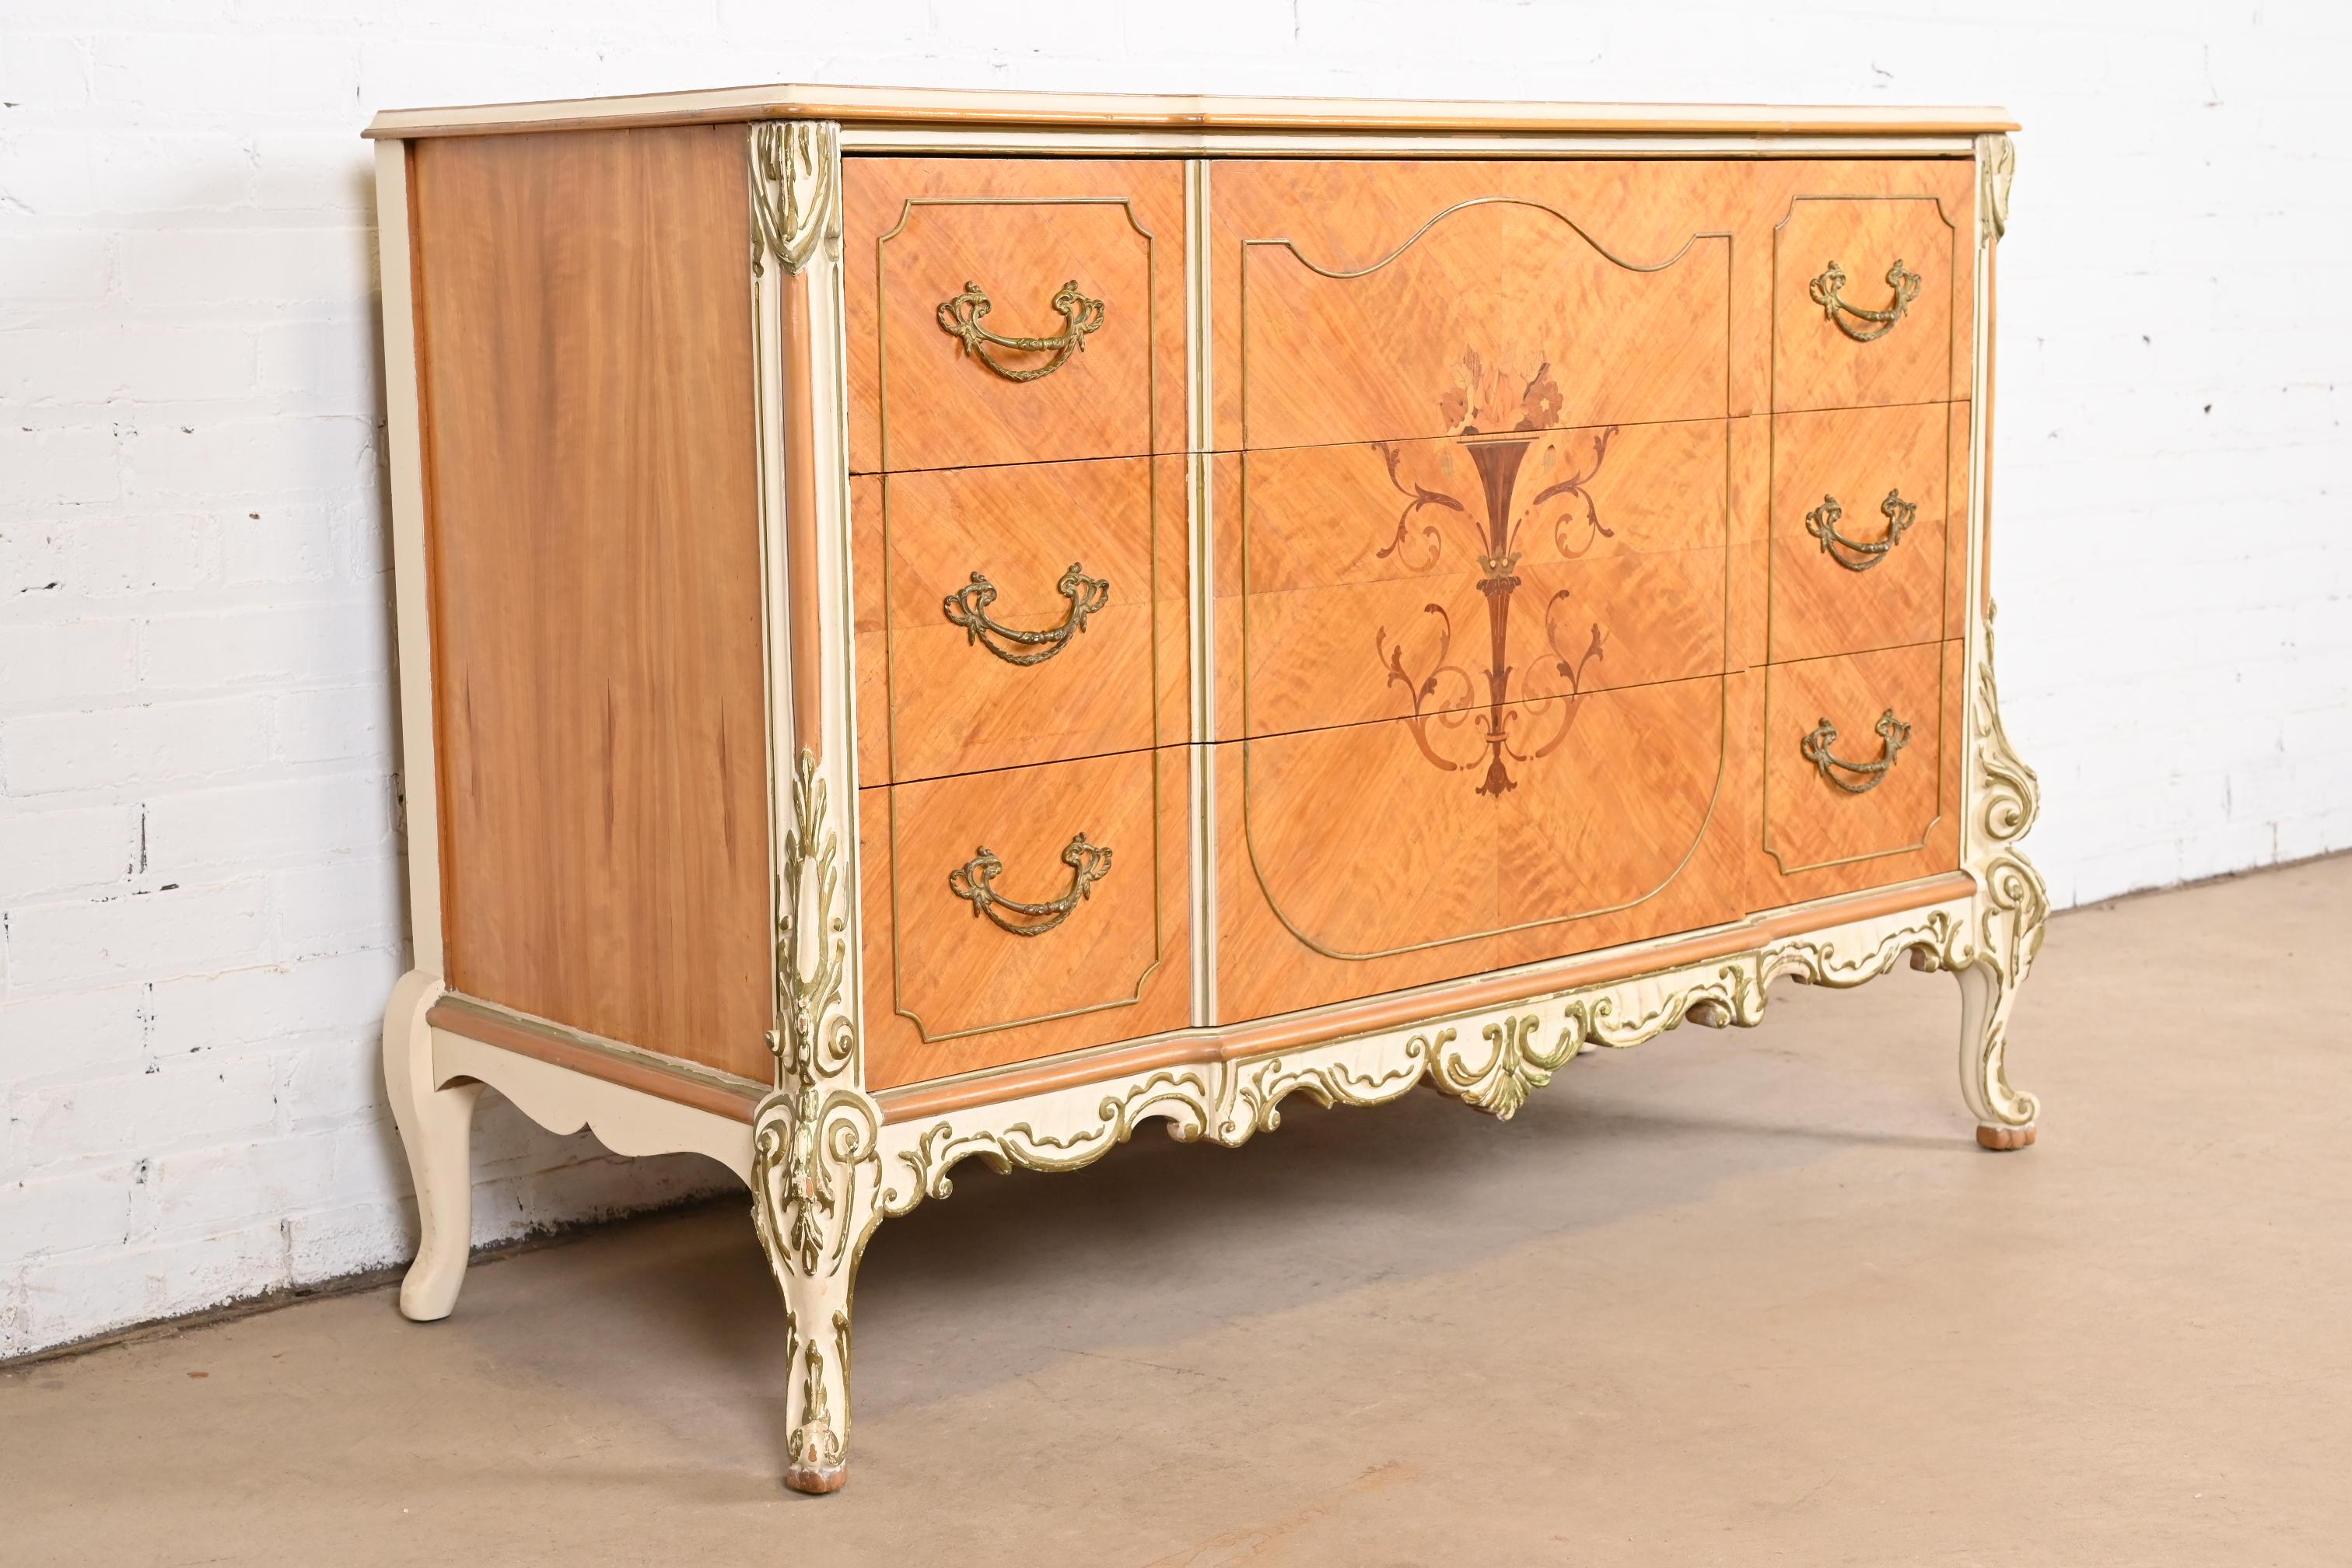 Mid-20th Century Romweber French Rococo Satinwood Inlaid Marquetry Parcel Painted Dresser, 1930s For Sale